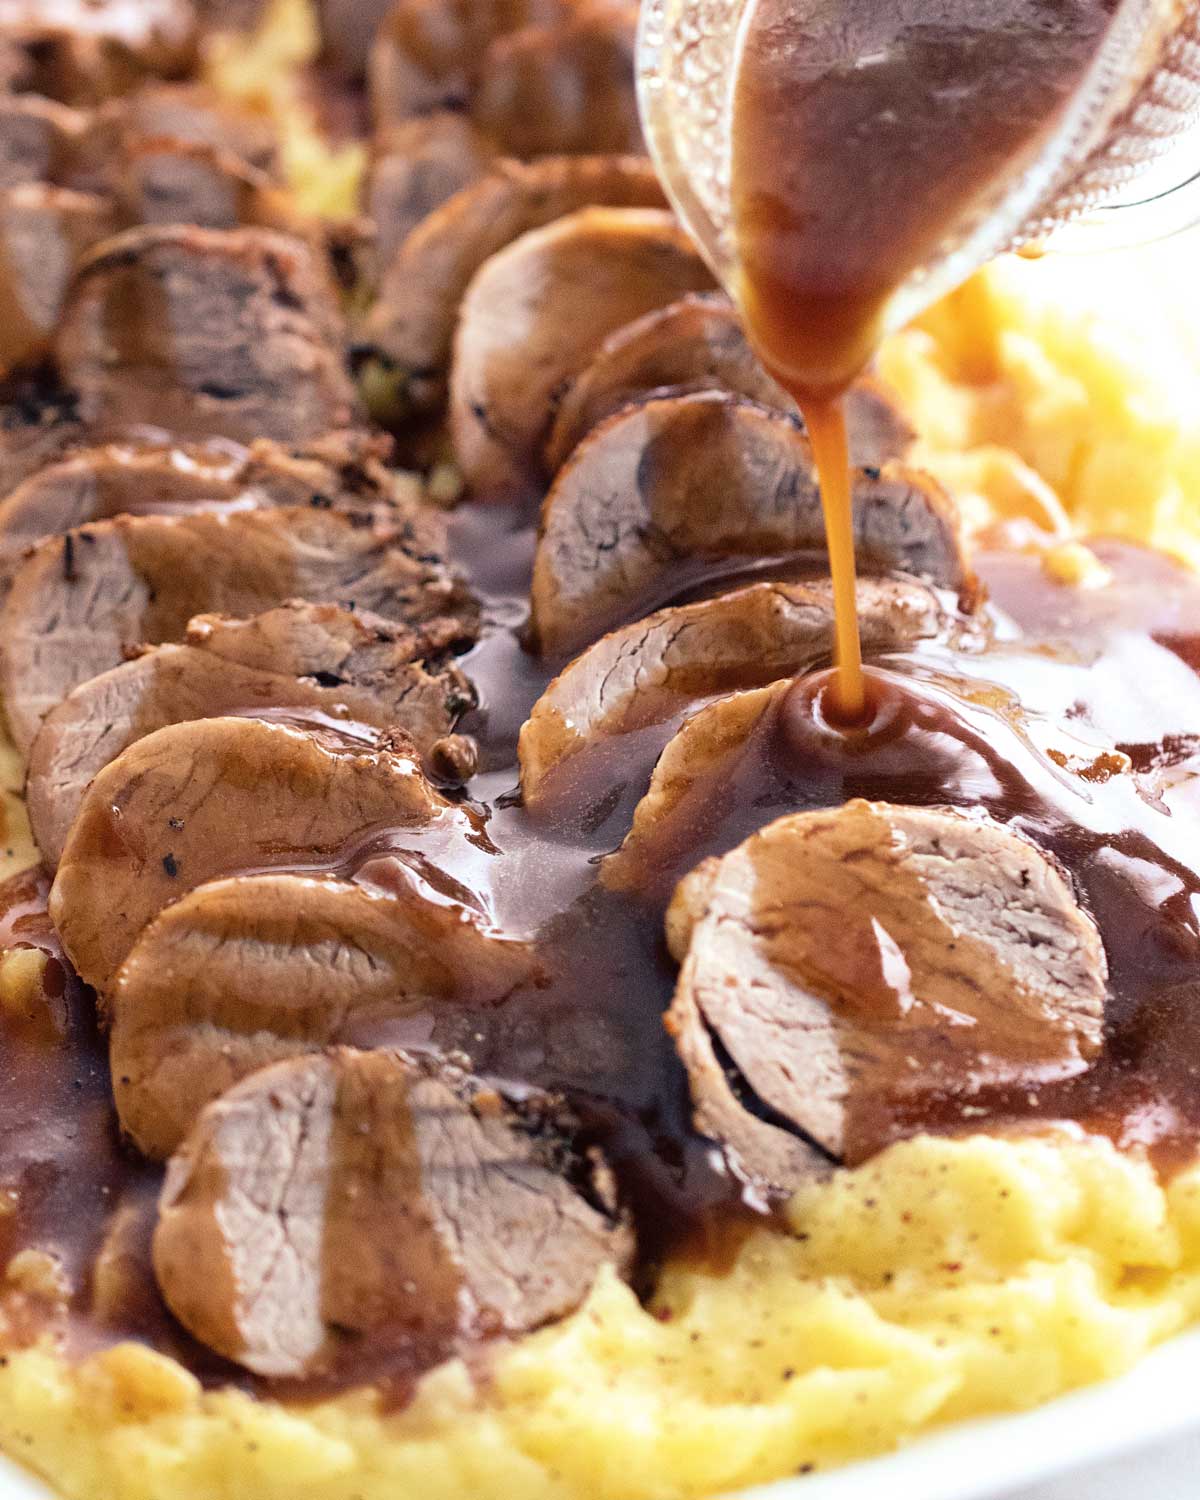 gravy being poured over sliced pork loin on top of a bed of mashed potatoes